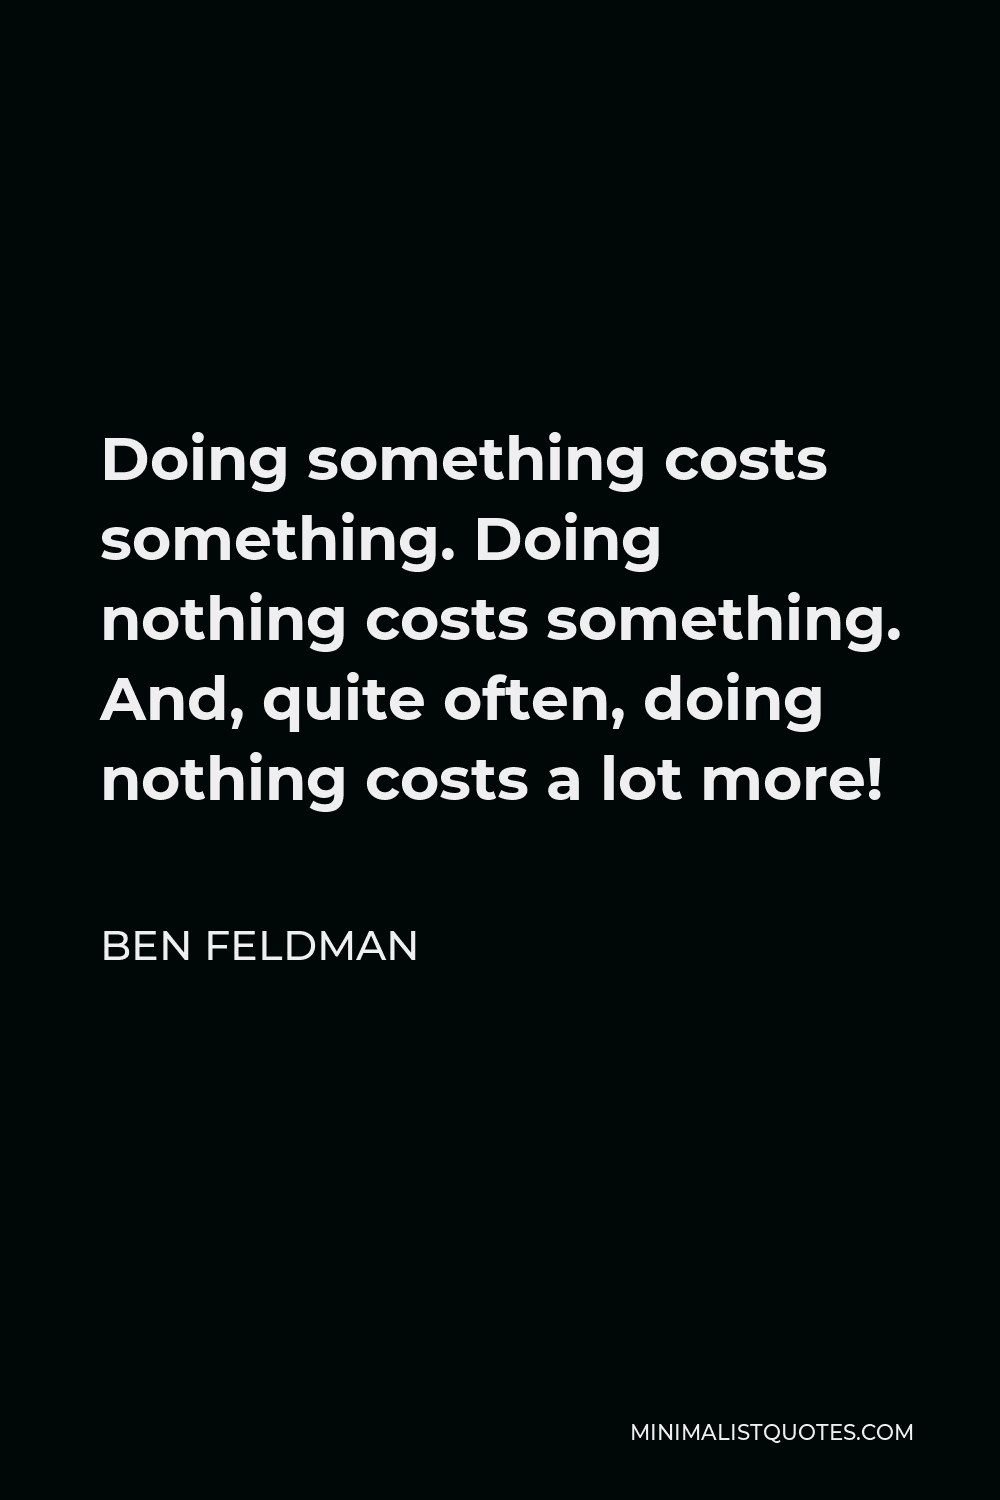 Ben Feldman Quote - Doing something costs something. Doing nothing costs something. And, quite often, doing nothing costs a lot more!